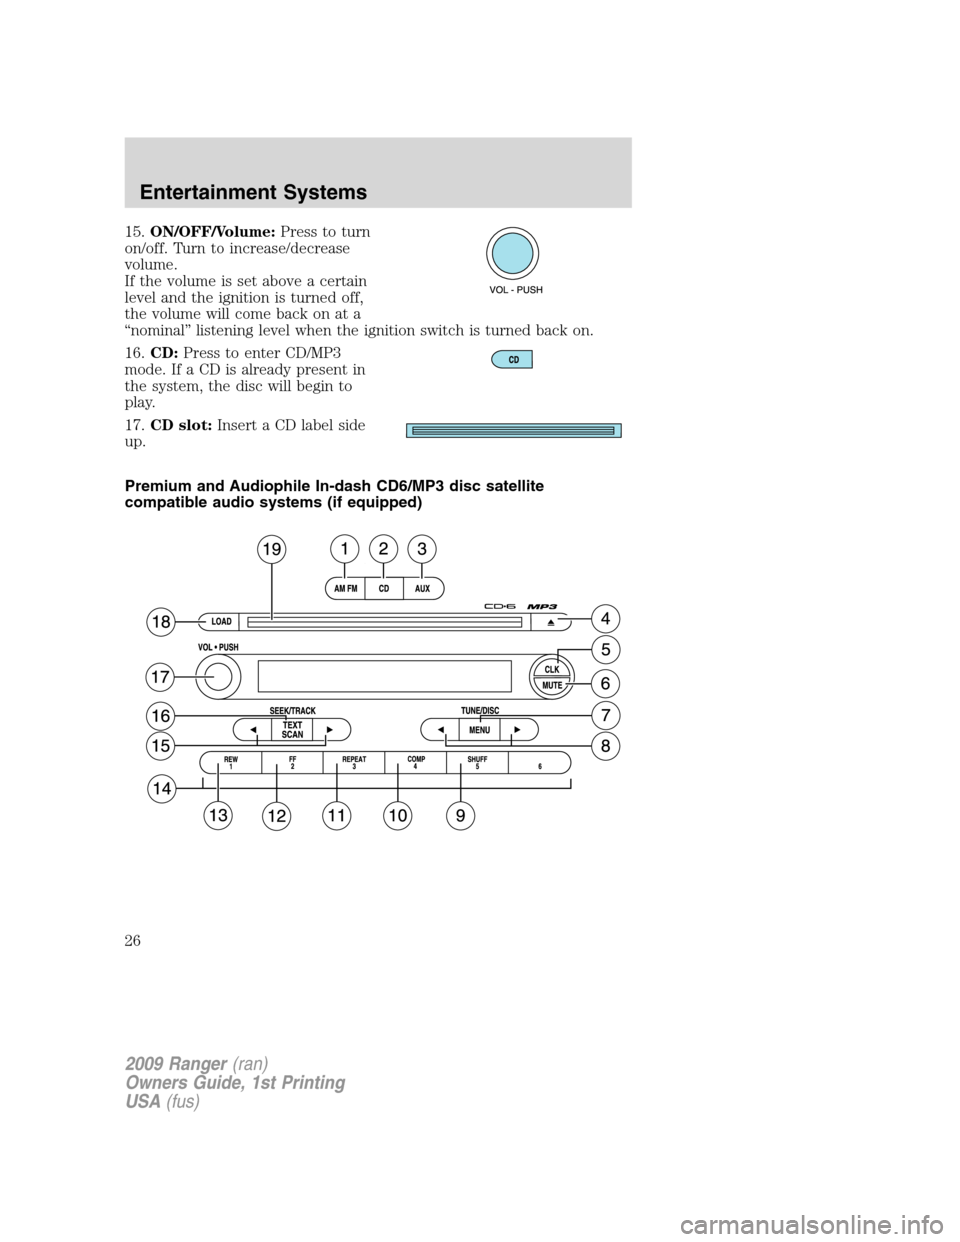 FORD RANGER 2009 2.G Owners Manual 15.ON/OFF/Volume:Press to turn
on/off. Turn to increase/decrease
volume.
If the volume is set above a certain
level and the ignition is turned off,
the volume will come back on at a
“nominal” list